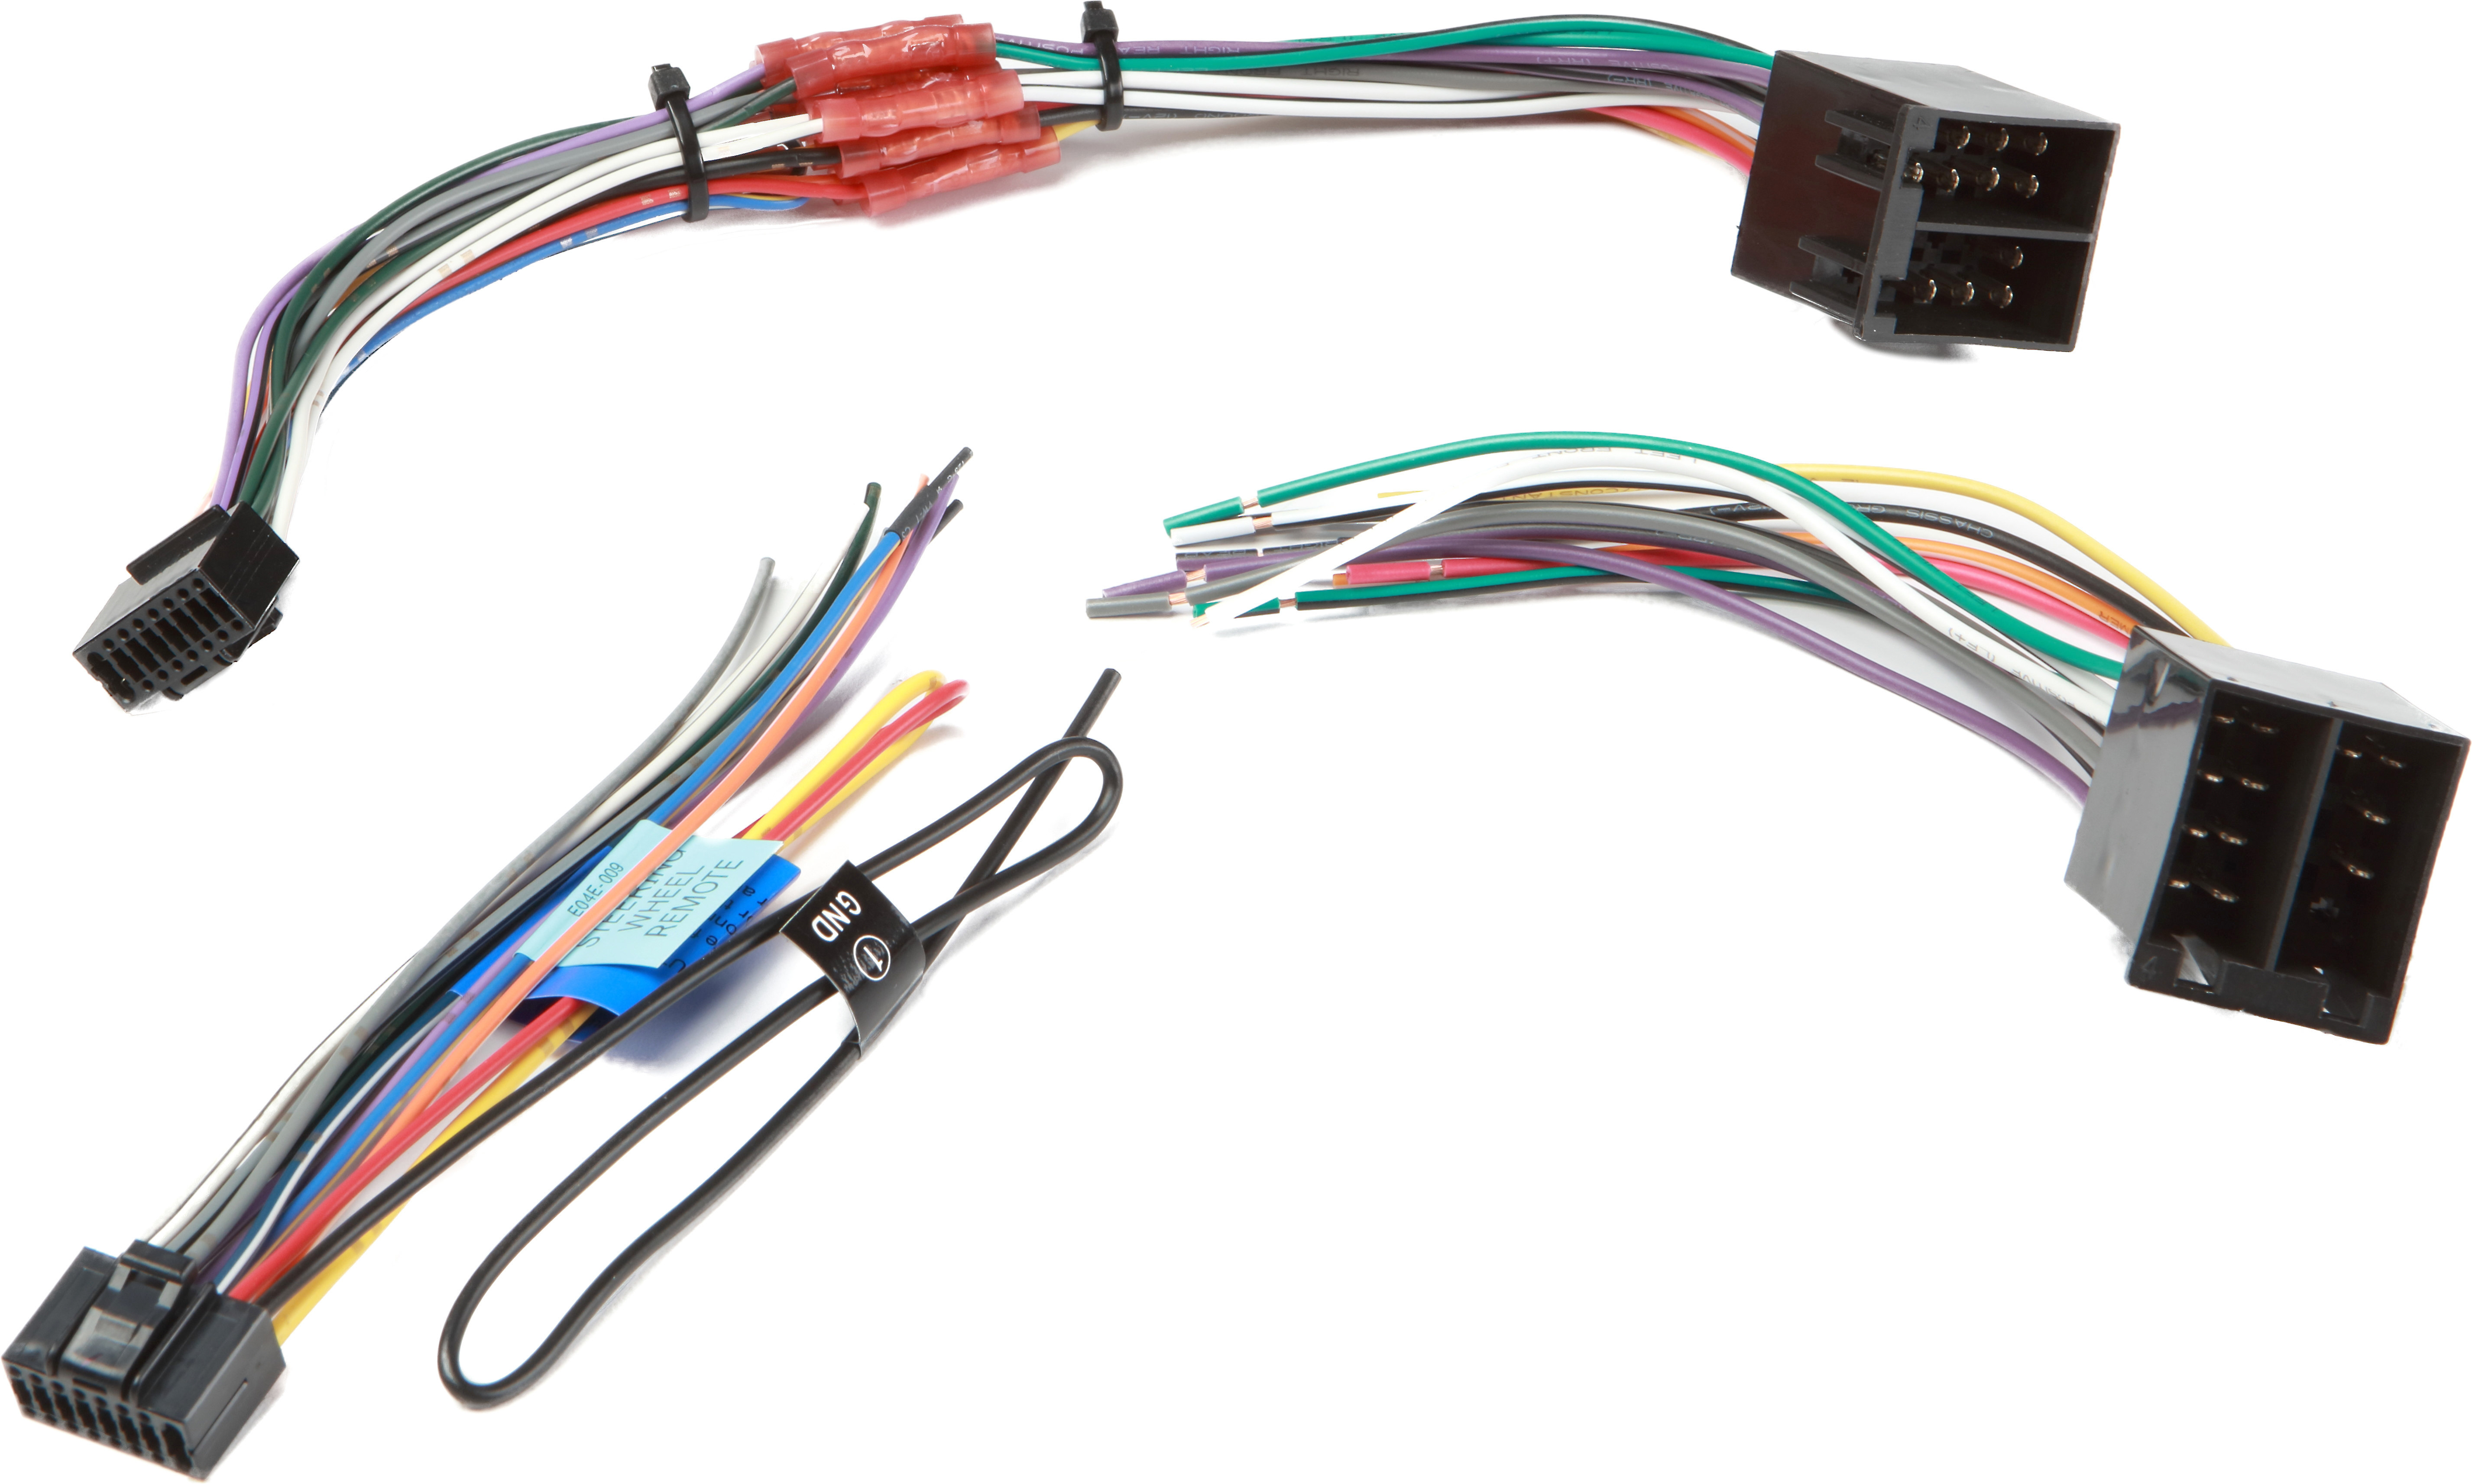 2008 Jeep Wrangler Stereo Wiring Harness from images.crutchfieldonline.com